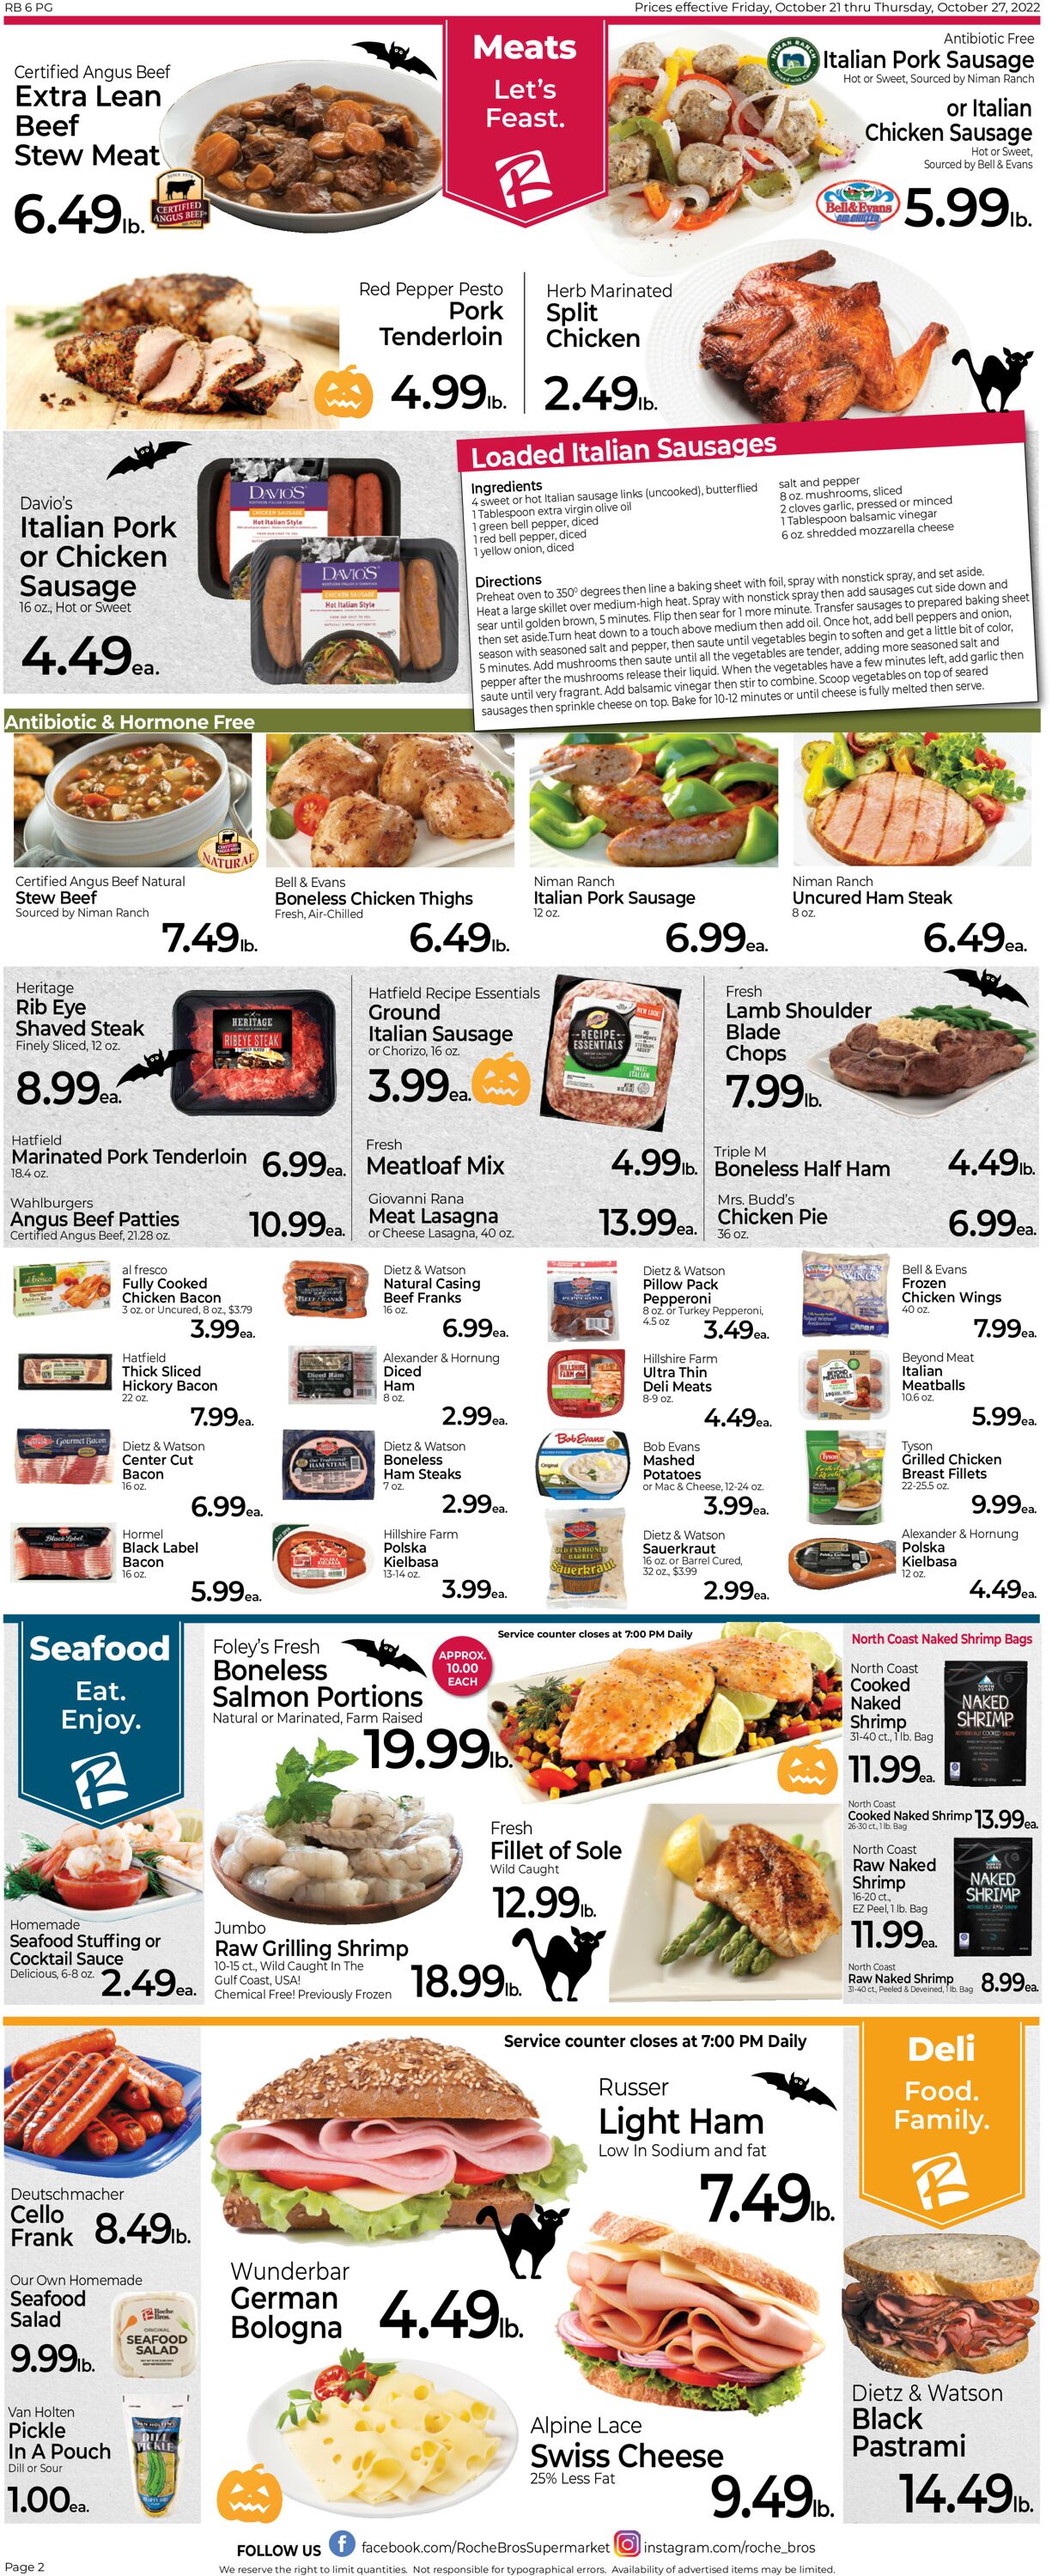 Roche Bros. Supermarkets Ad from 10/21/2022